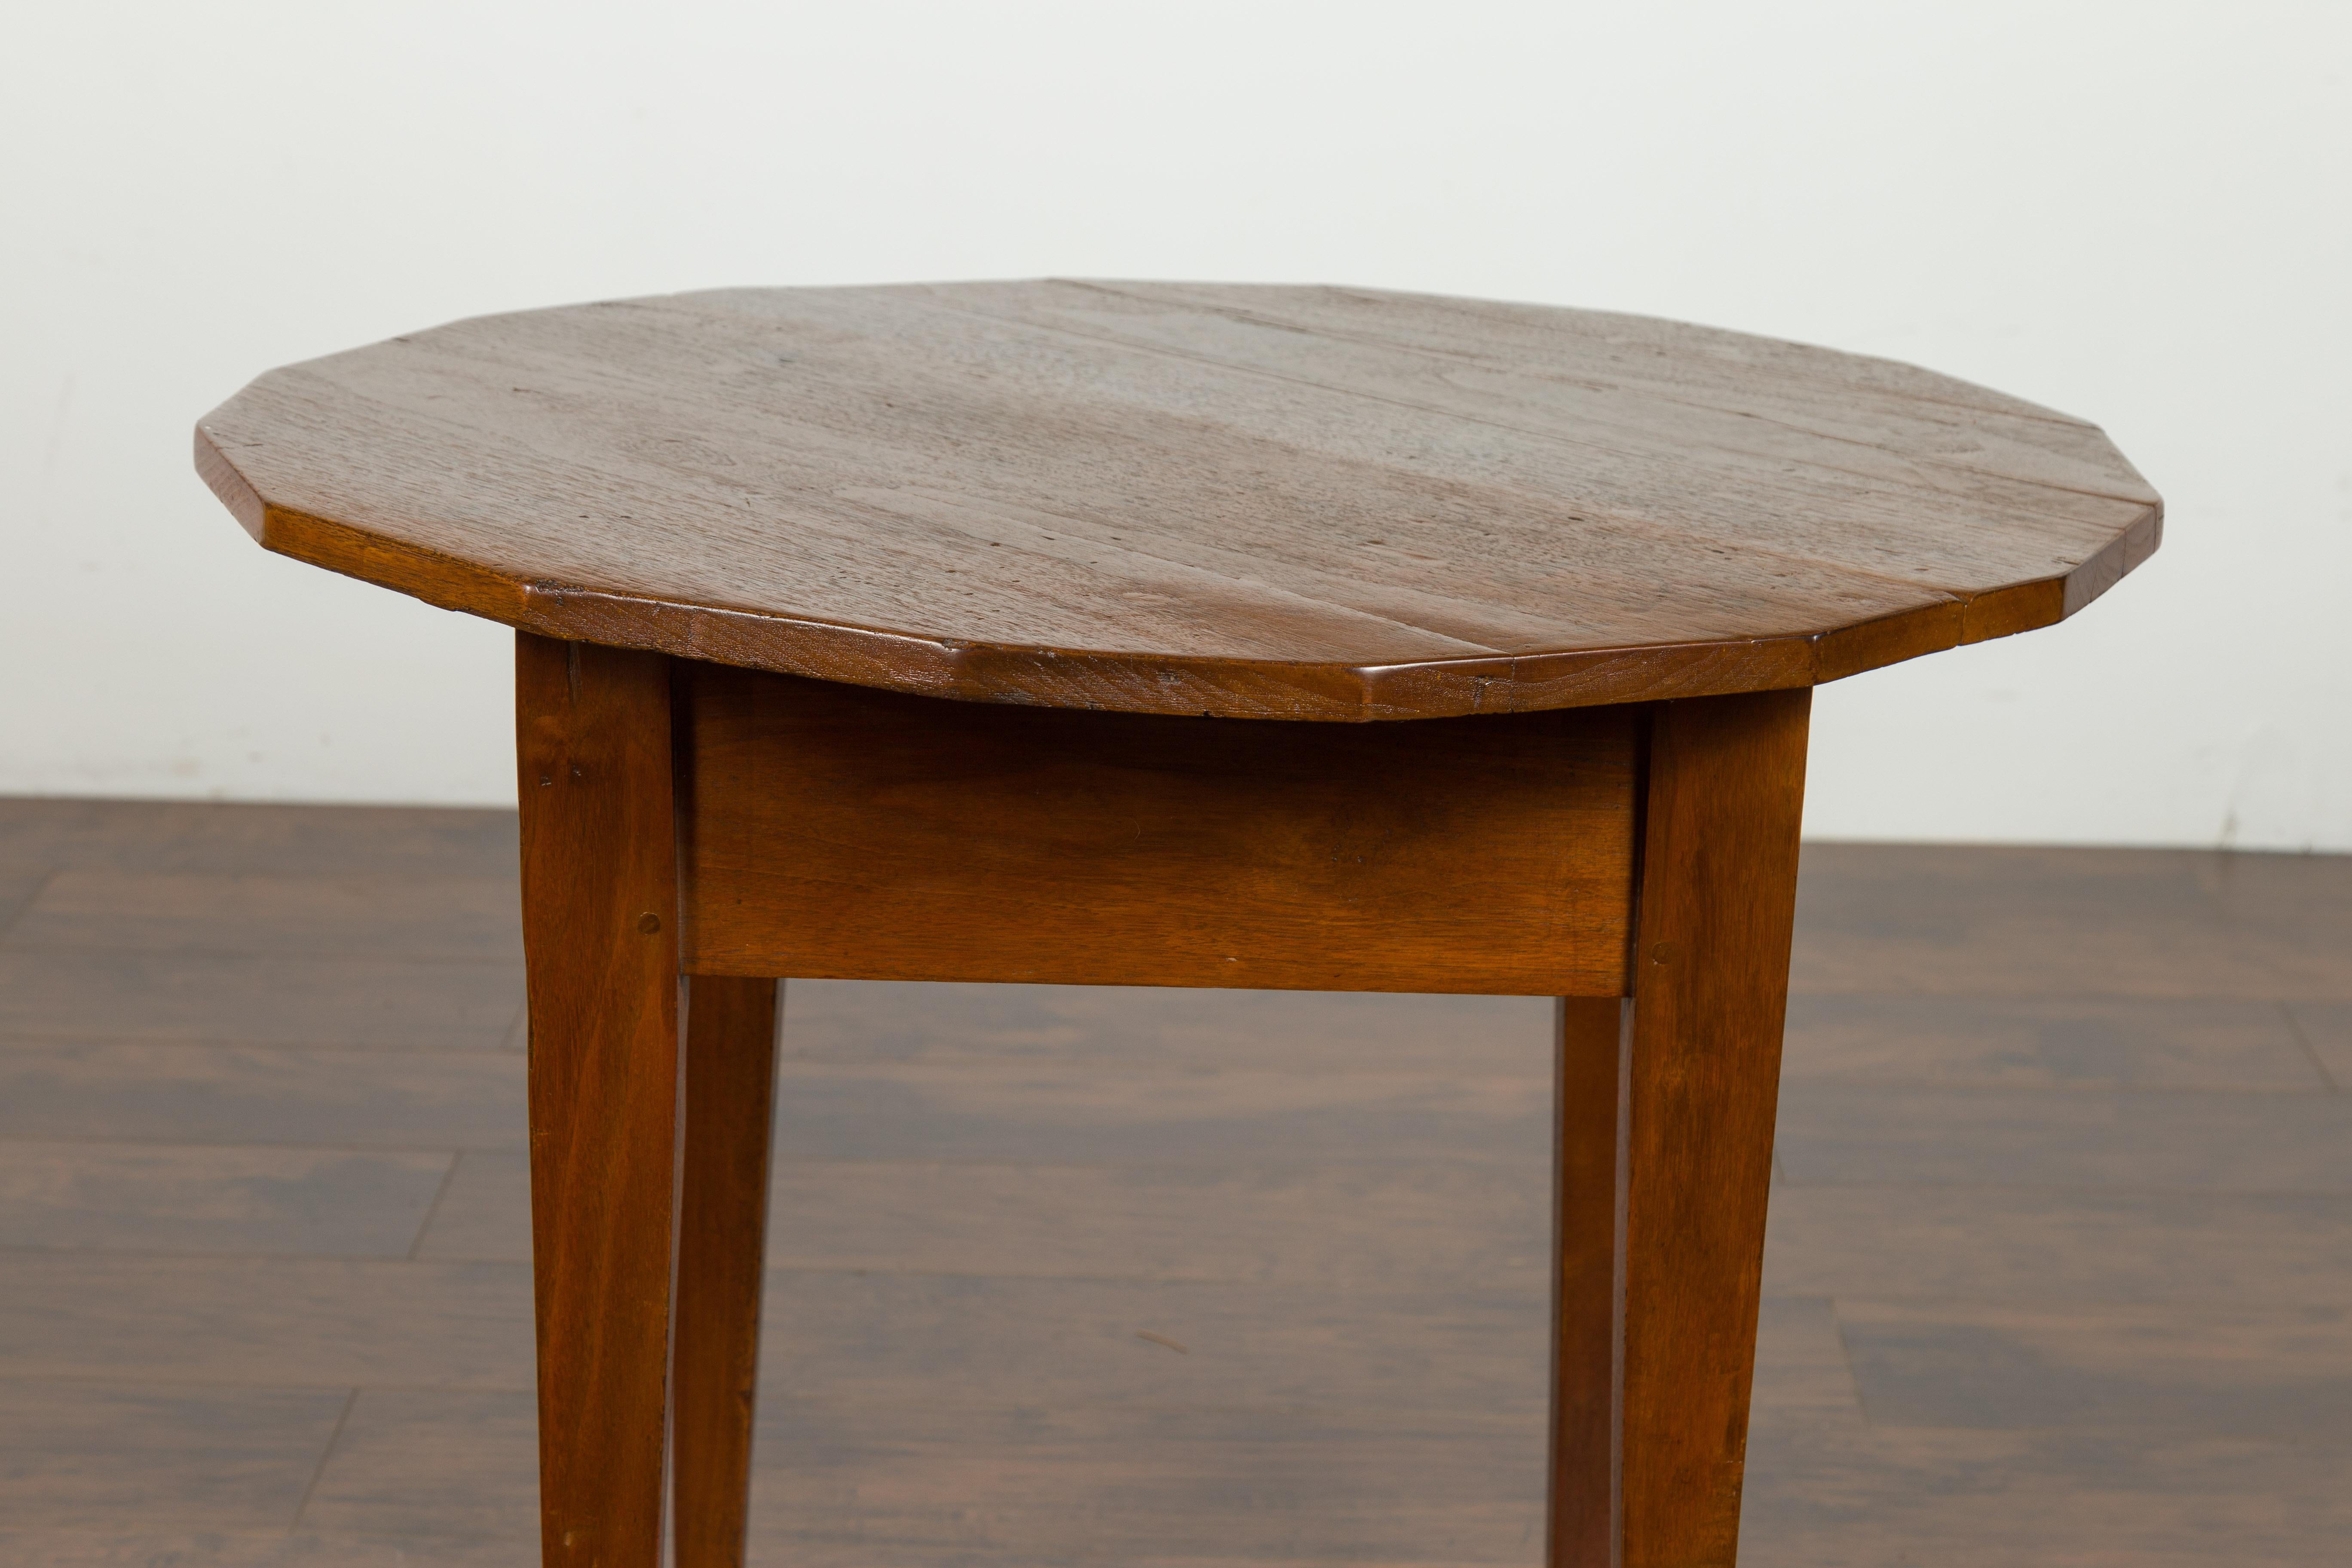 English 1860s Walnut Side Table with Polygonal Top and Tapered Legs 1